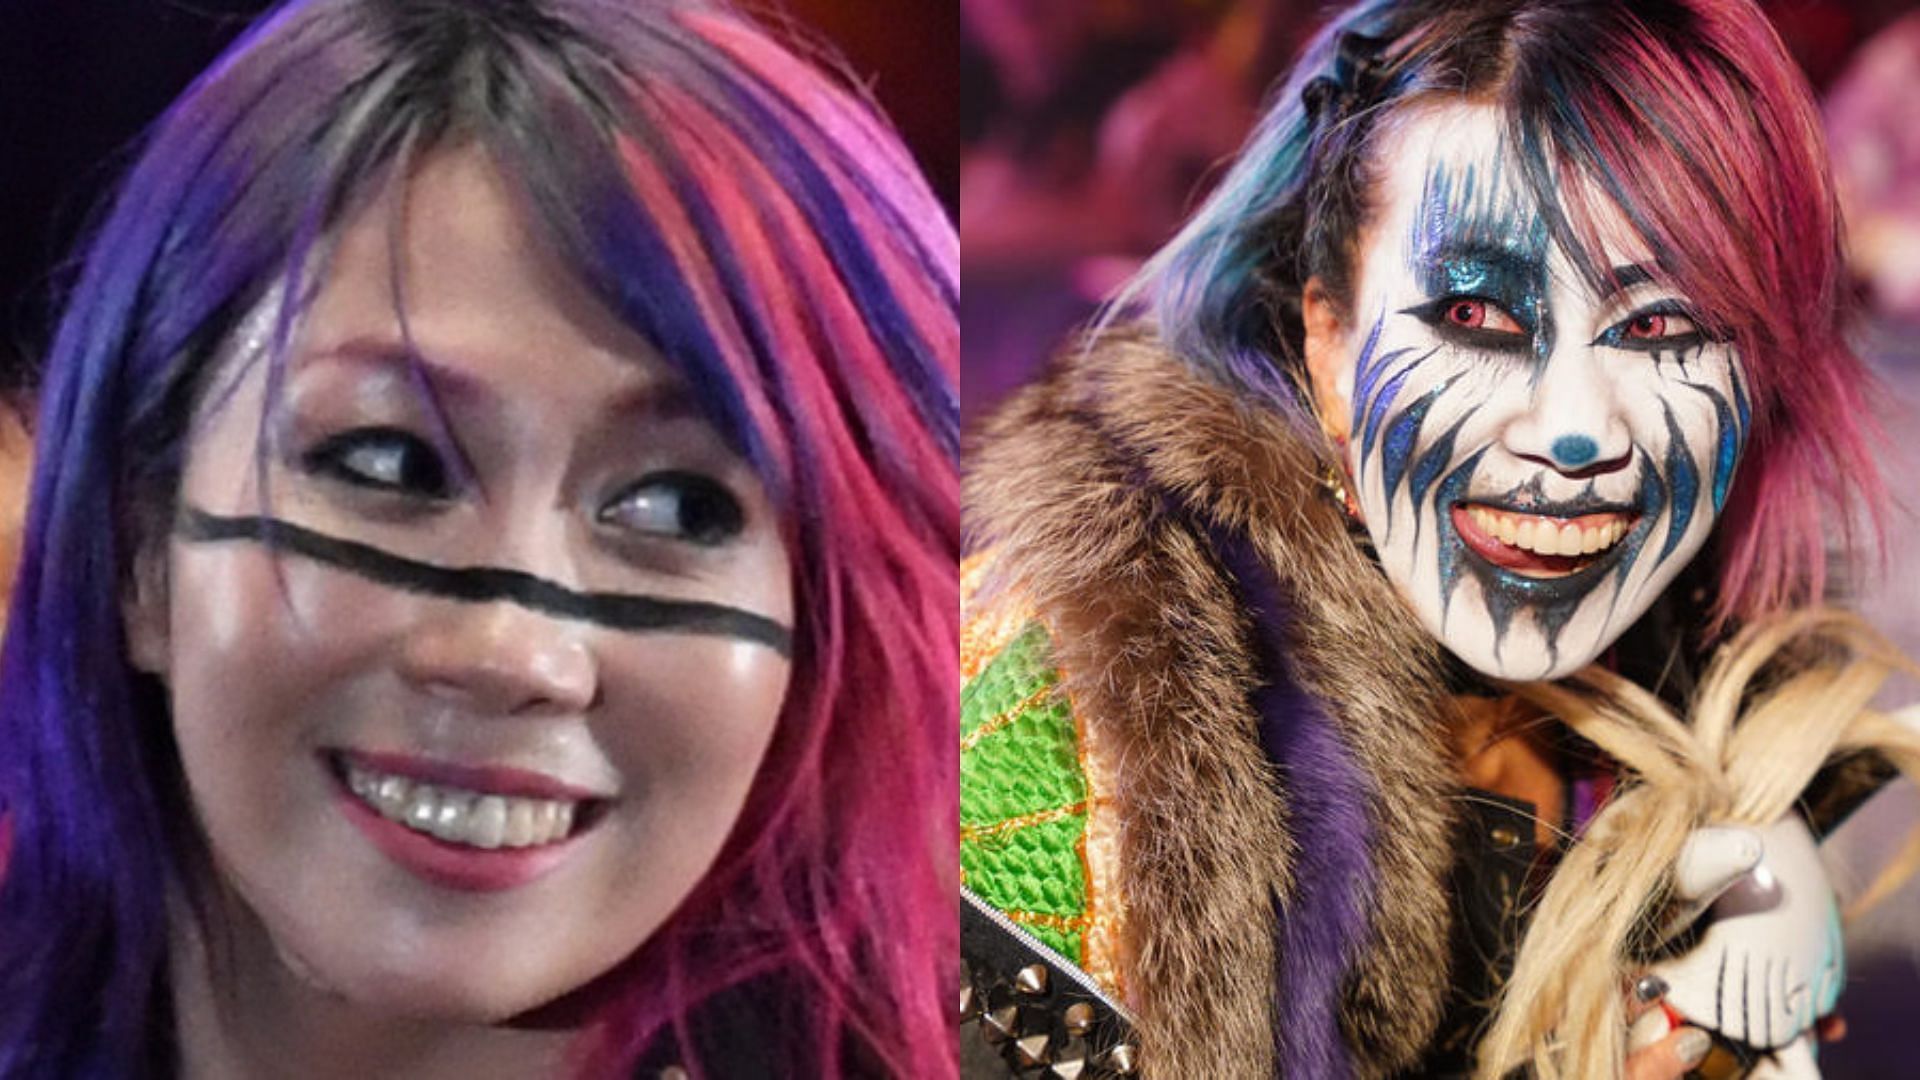 Asuka will be returning to the ring on SmackDown